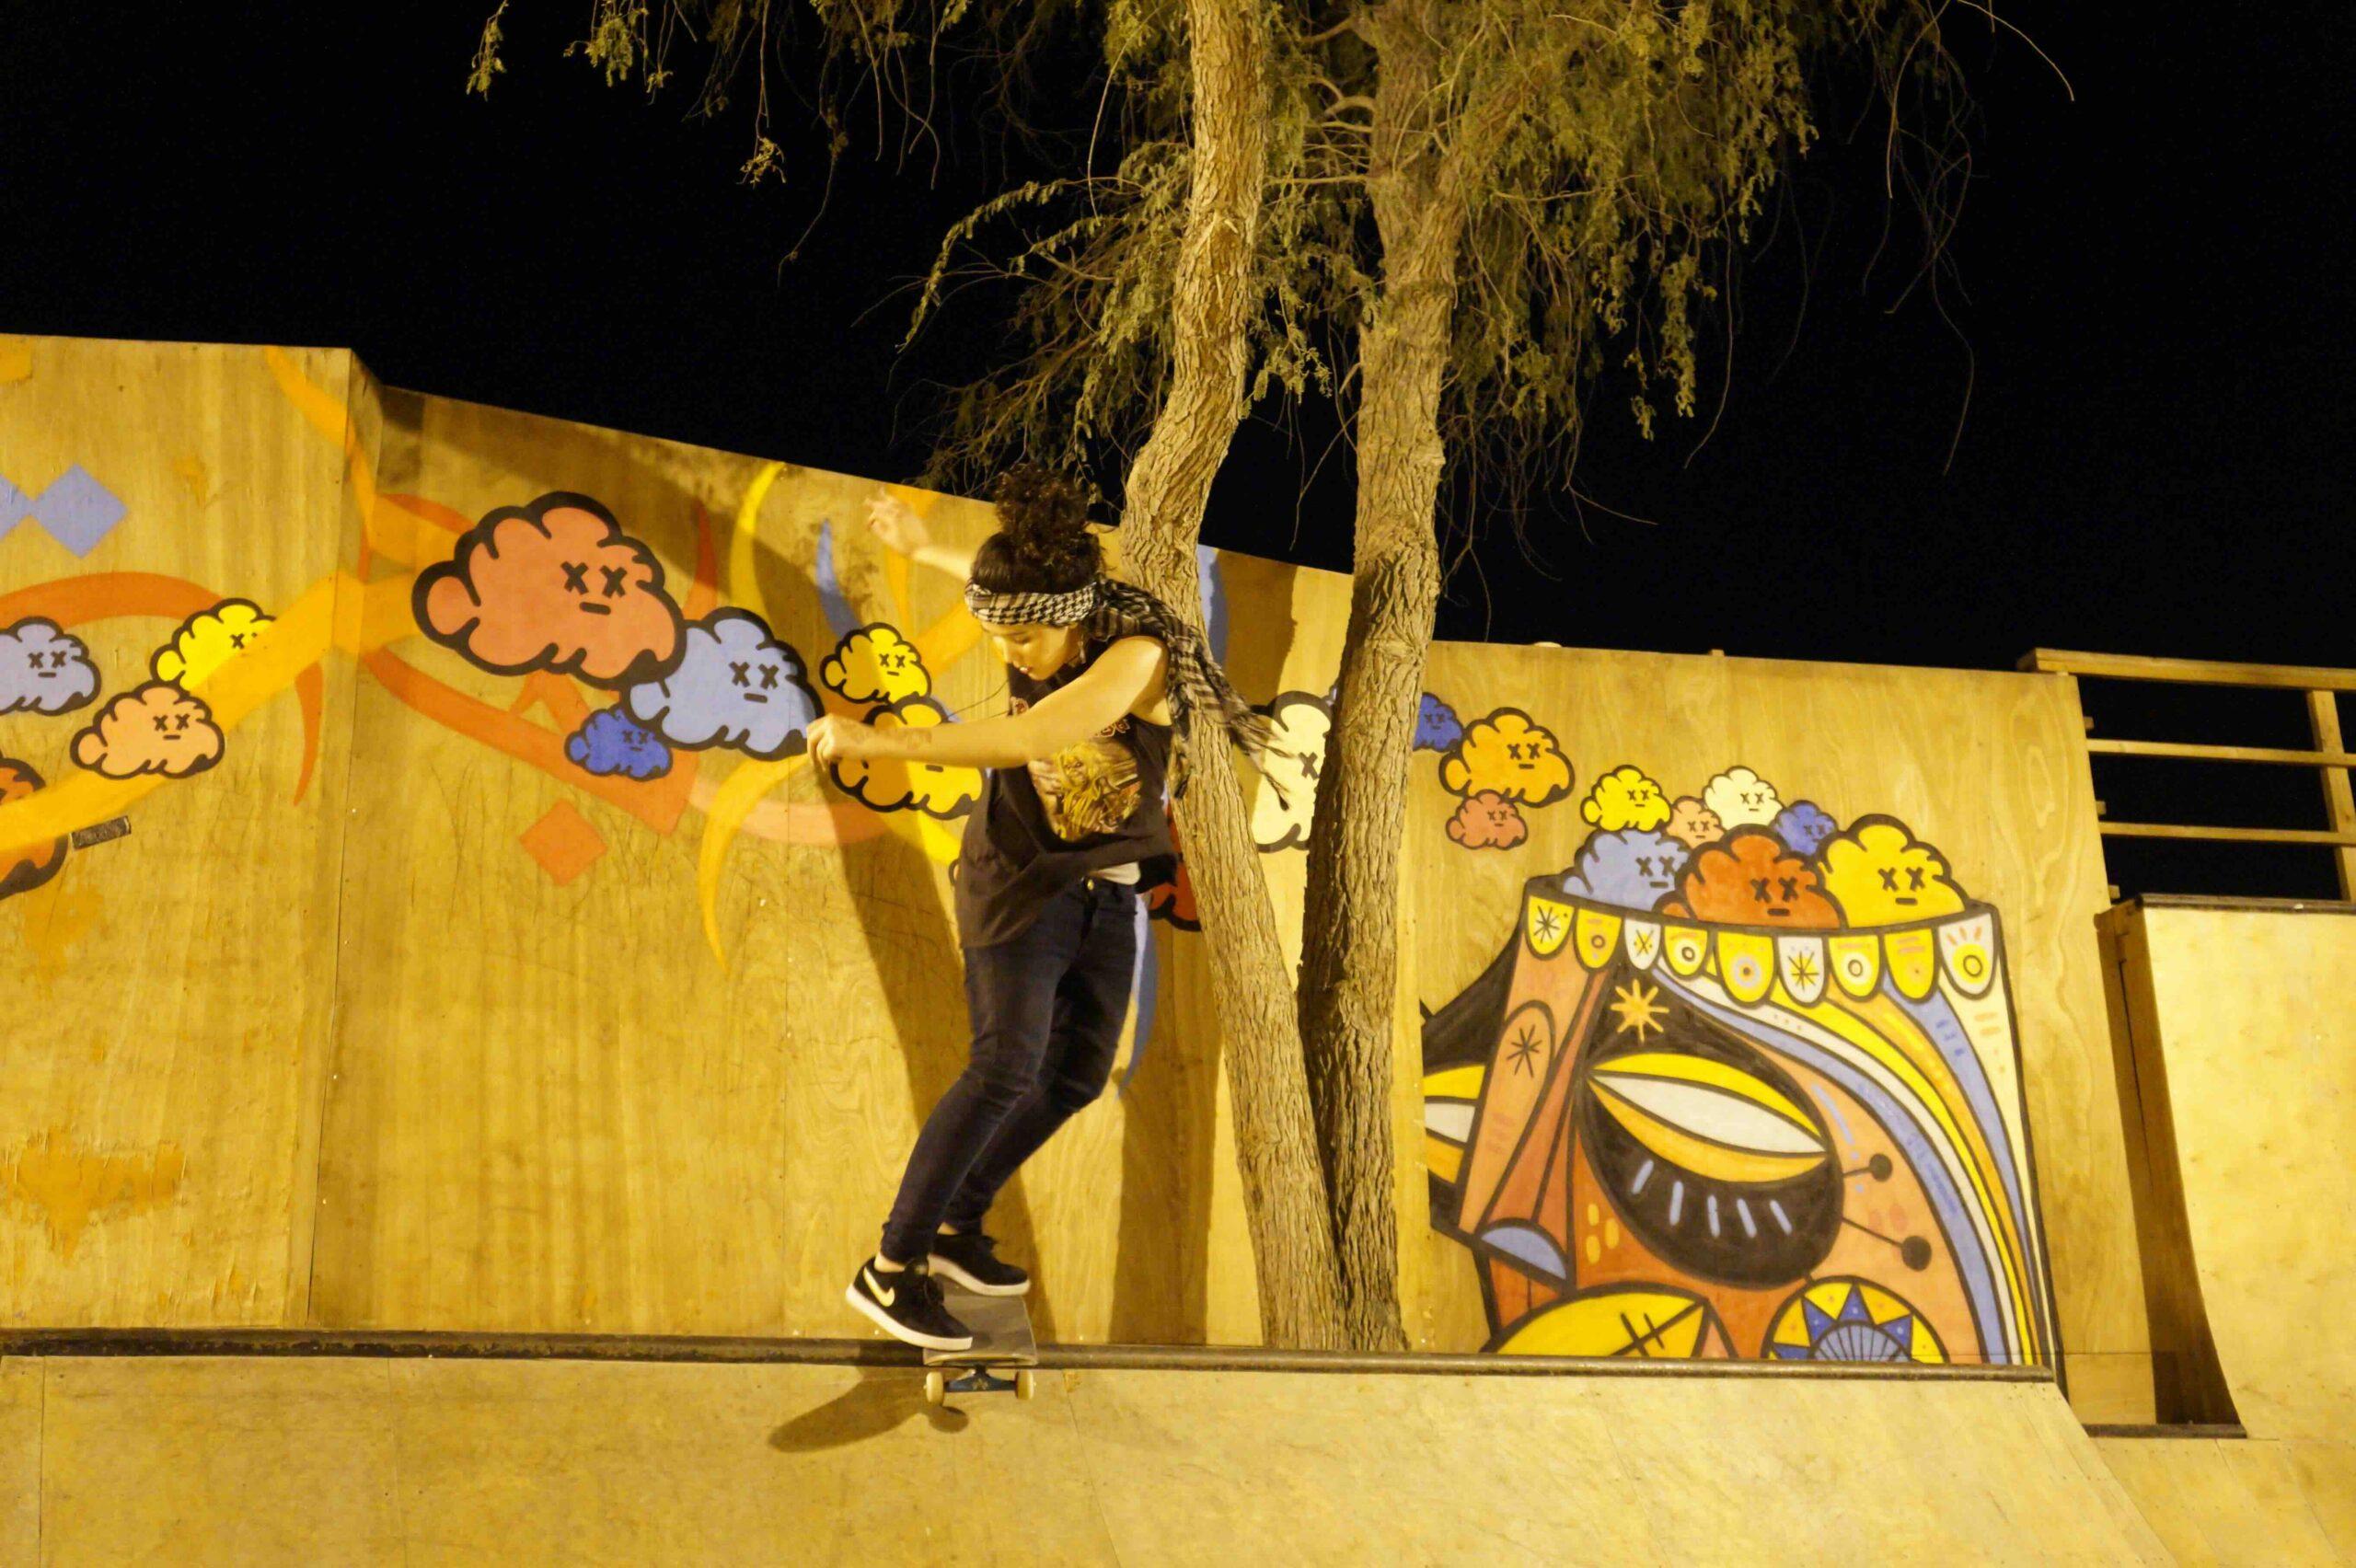 Abisha Safia on IWD: The Saudi skater talks about shifting stereotypes across the Middle East